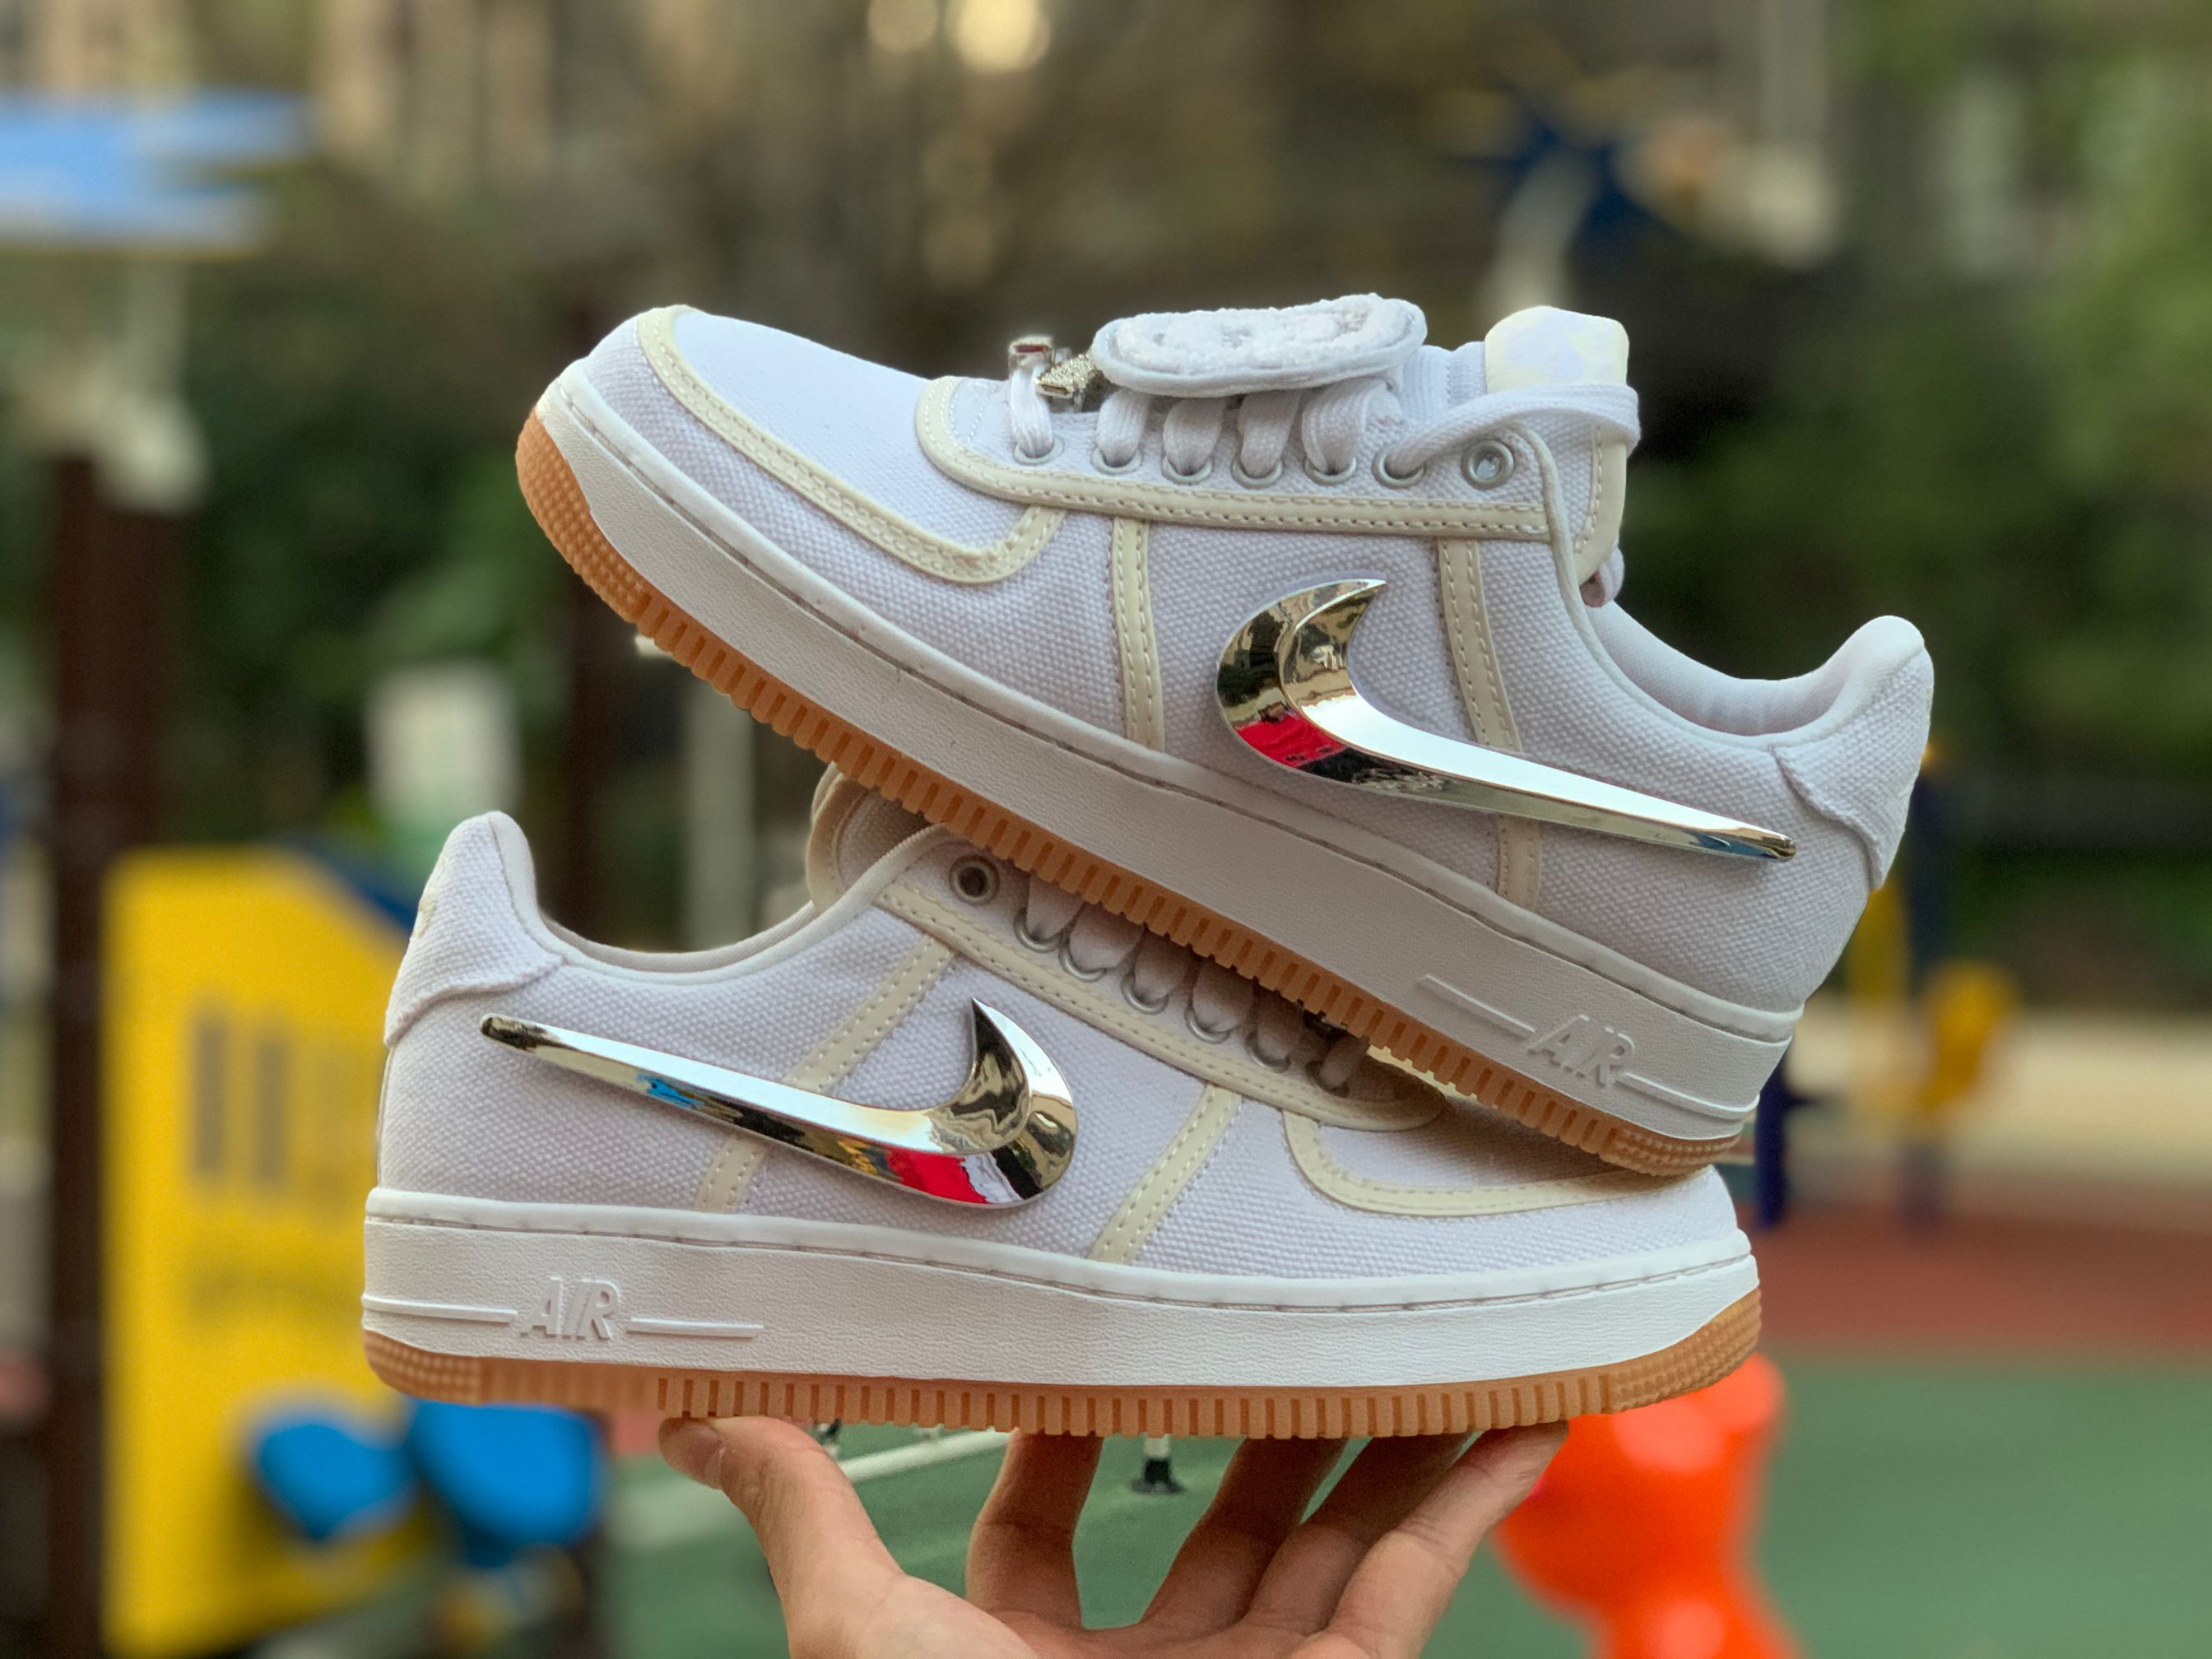 100 - Ogunbowale in the Voile Nike LeBron 16 What The via iconicsnow - 2020 nike air force 1 high wmns noble red 334031 200 release date info Low Travis Scott For Wholesale AQ4211